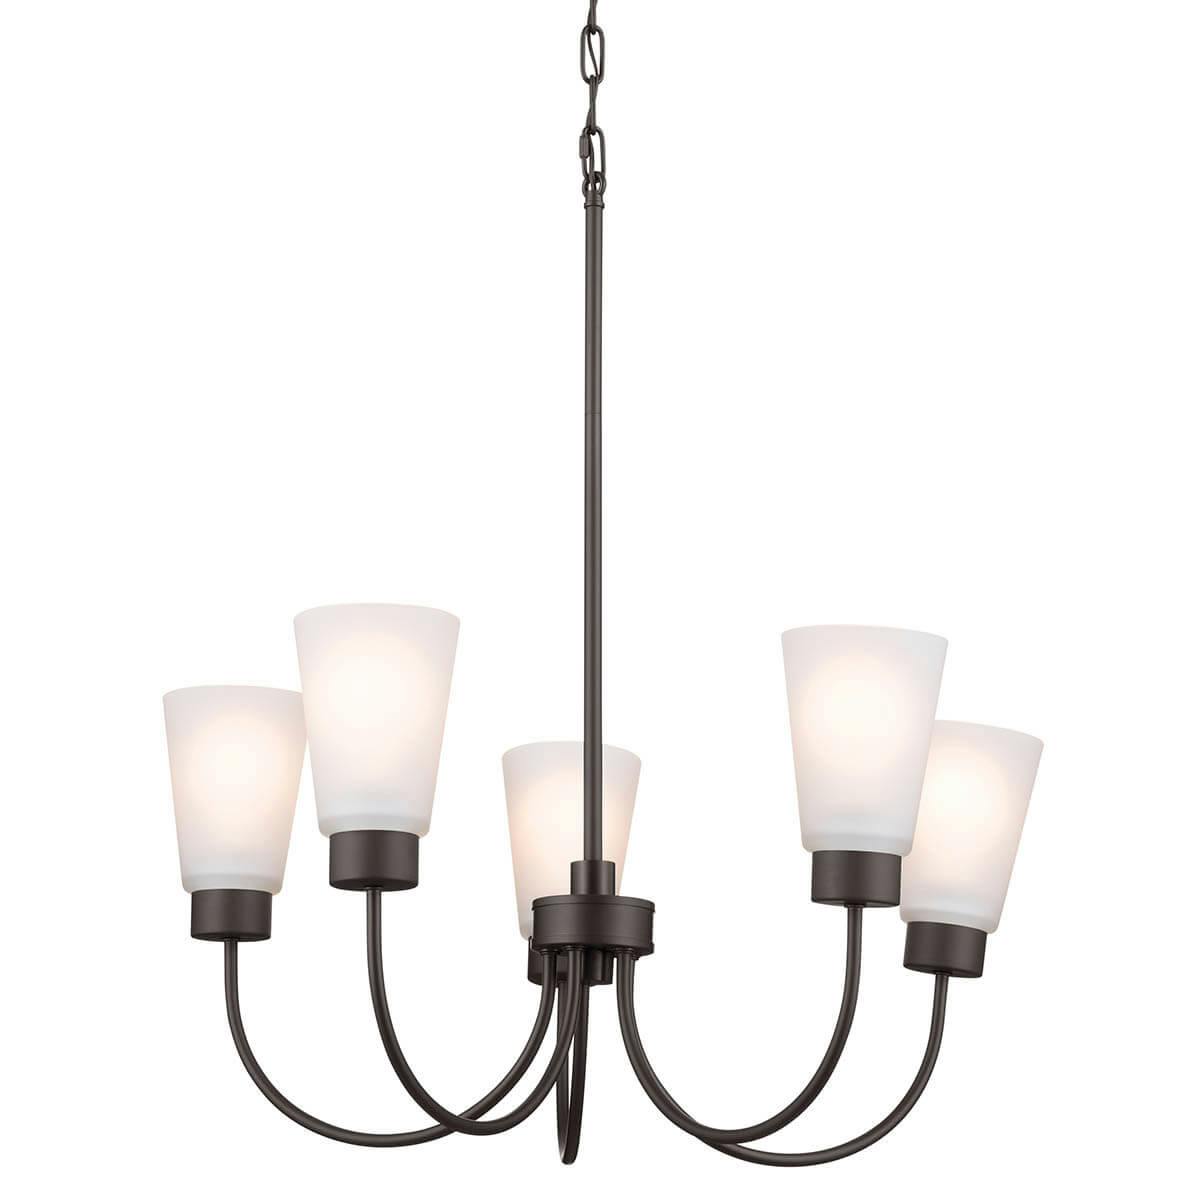 Erma 24" 5 Light Chandelier Olde Bronze® without the canopy on a white background